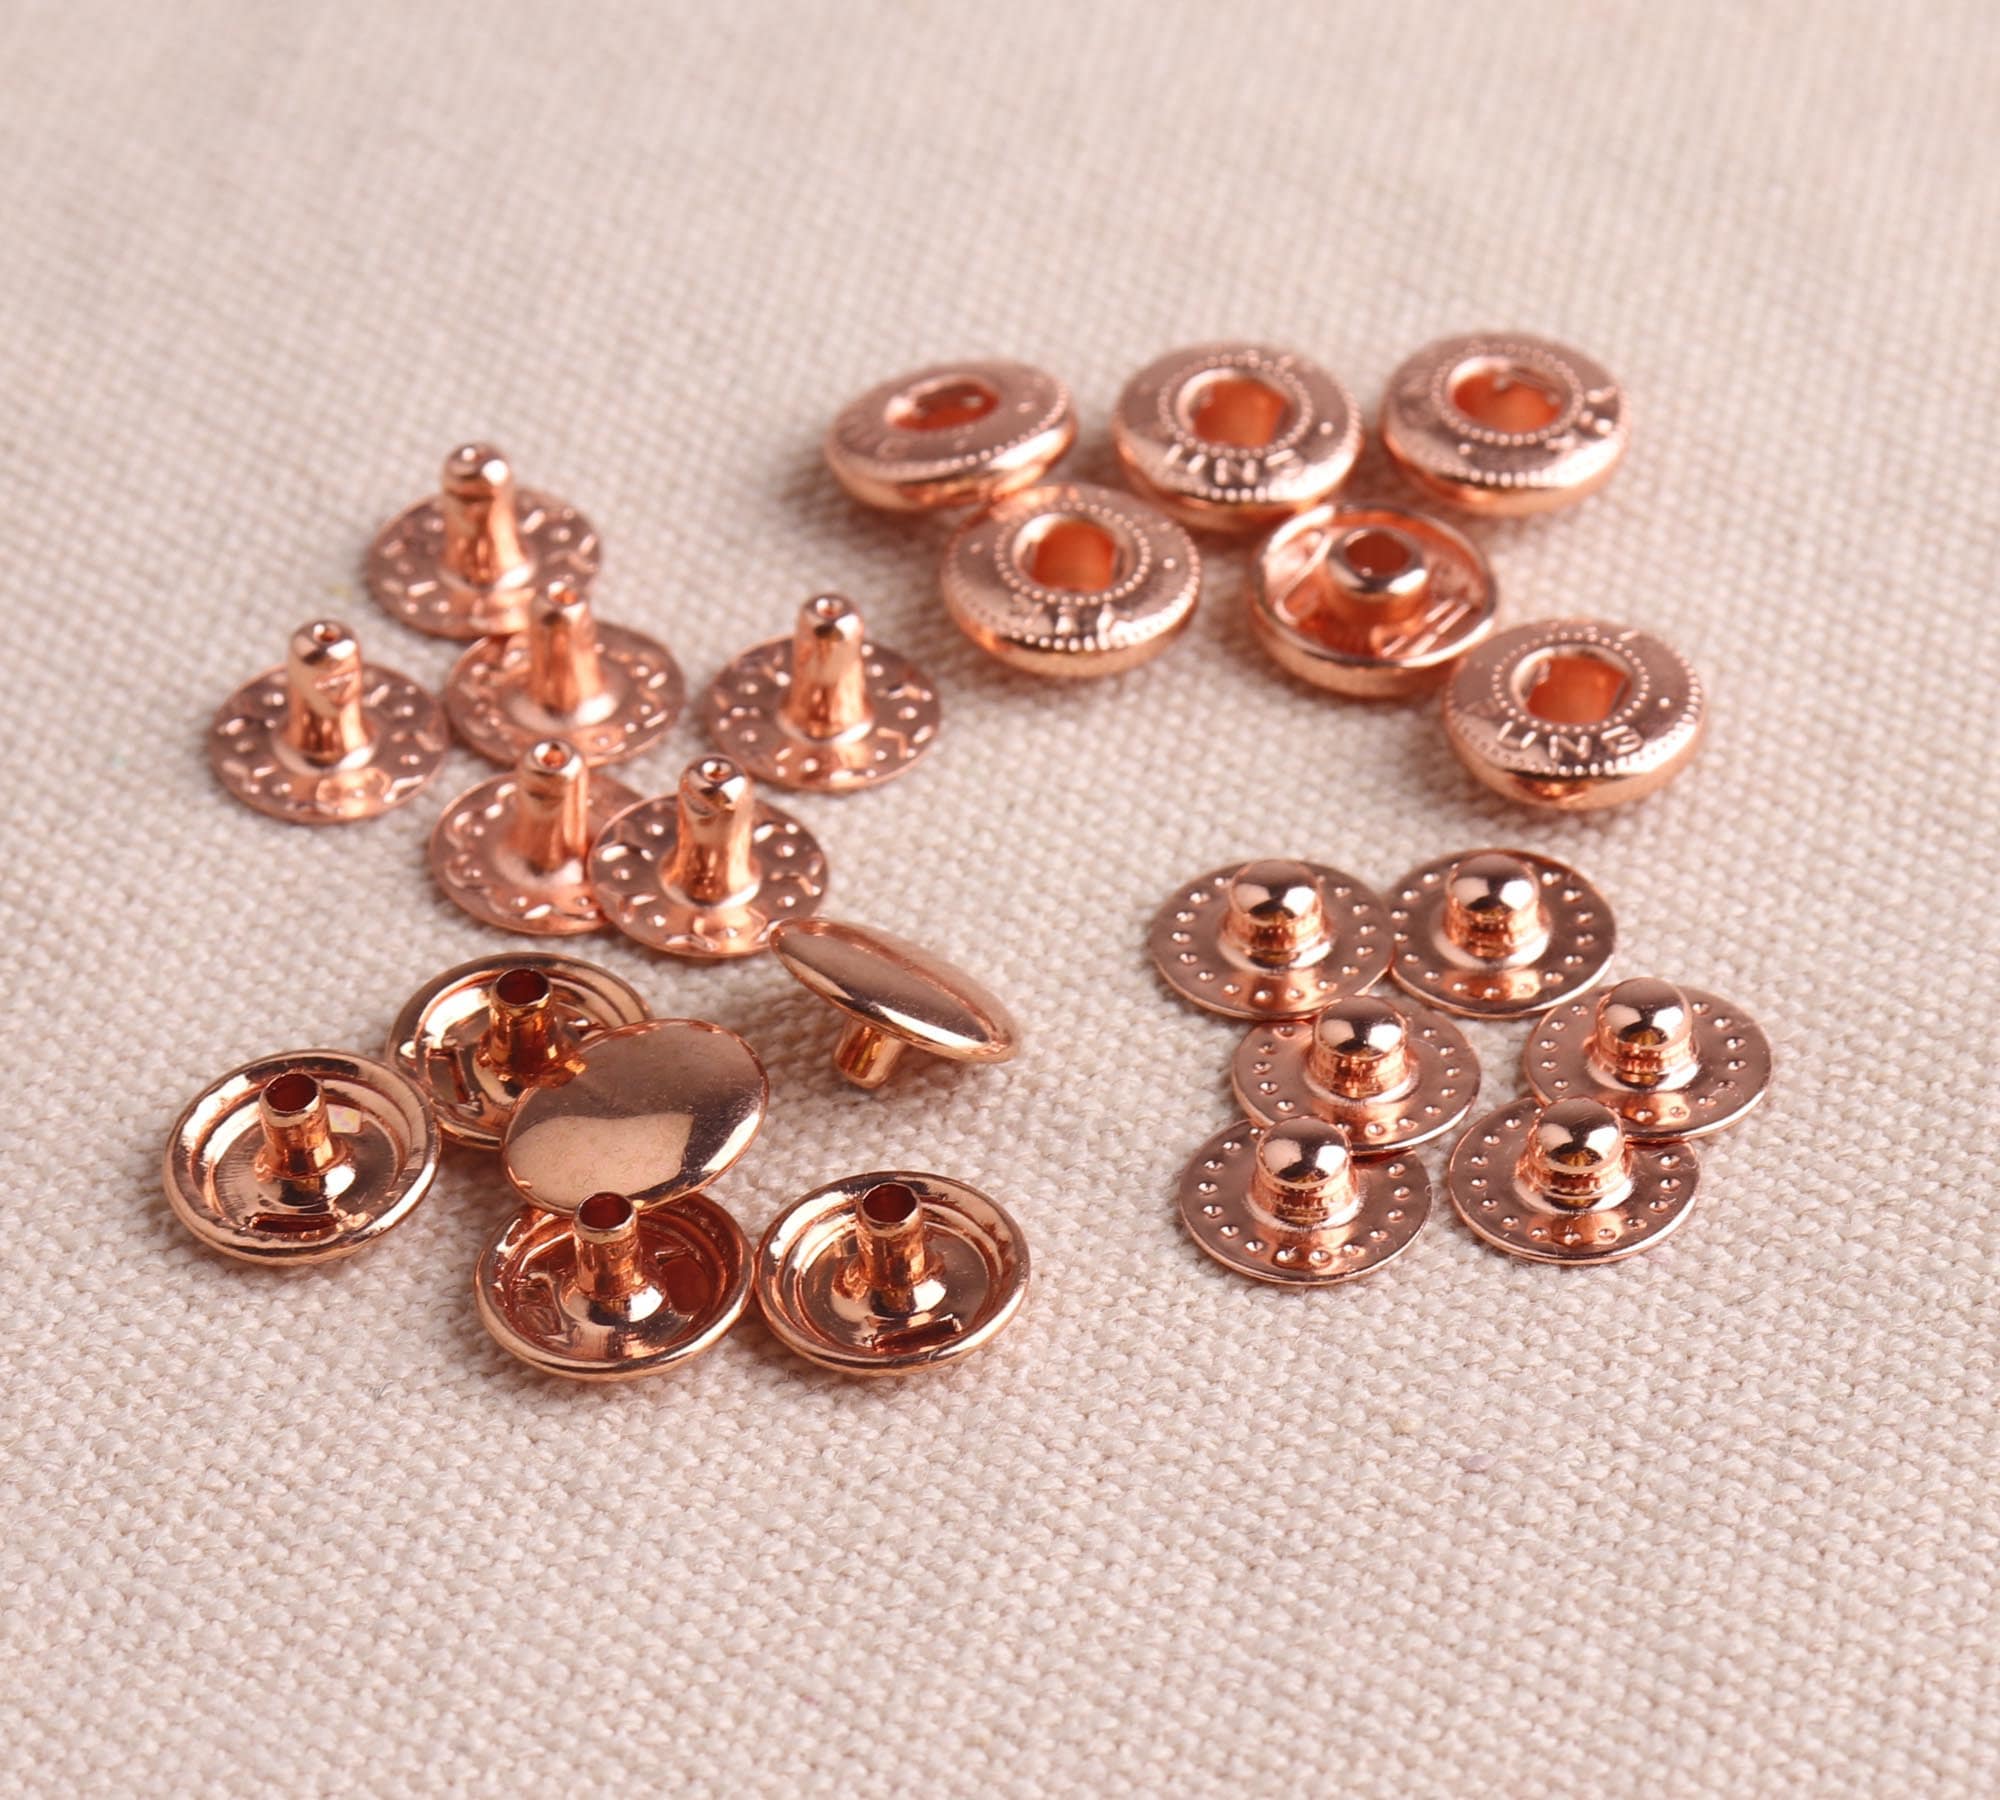 Metal Leather Snap Buttons 10mm Spring Snap Fasteners Kit Press Studs Clothing  Snaps Button Clothing Canvas Leather Craft Sewing 20/50 Sets 